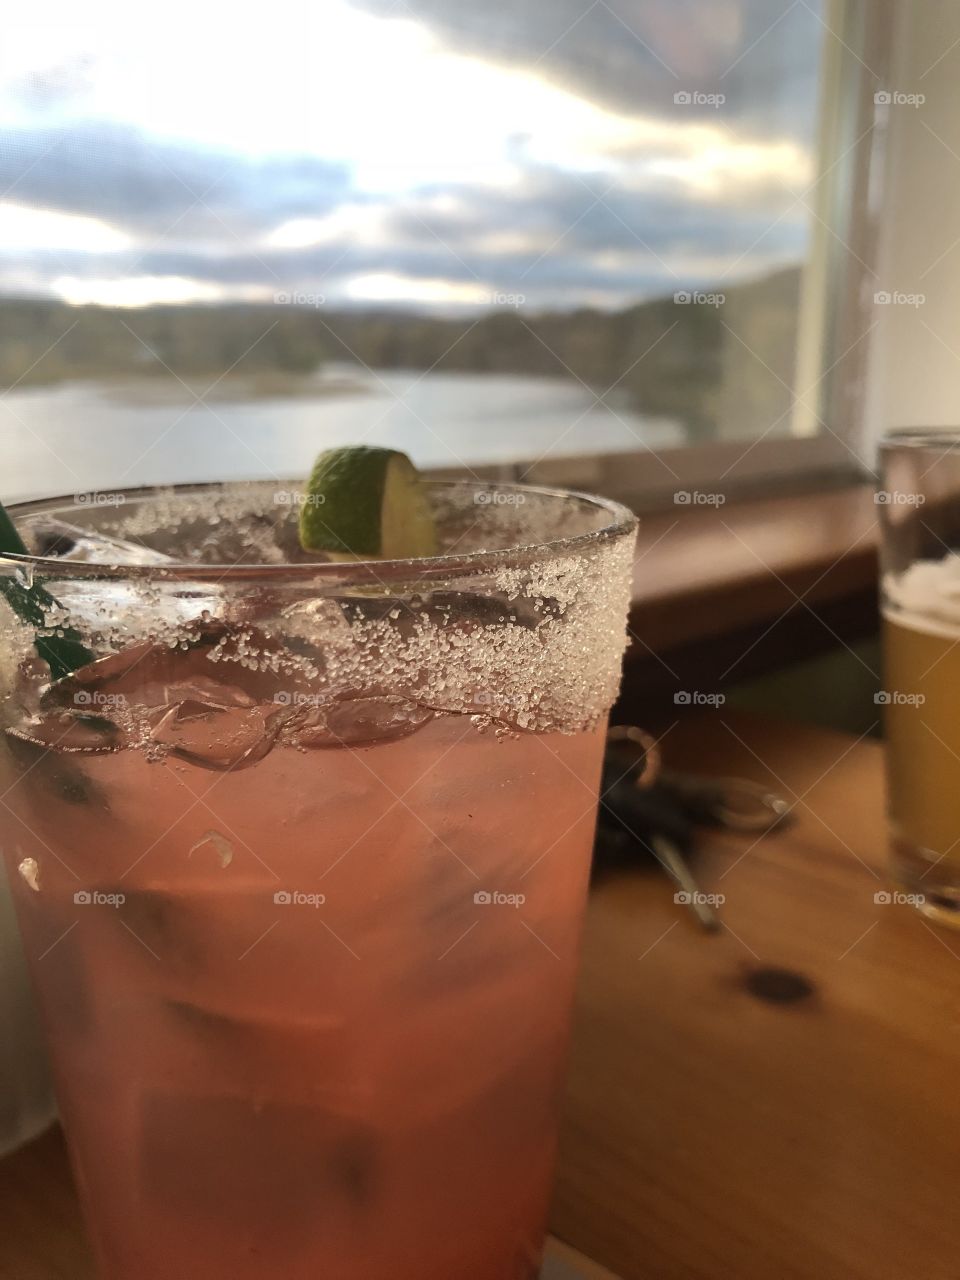 Strawberry Margarita in a clear glass with sugar and lime on rim, a beer in a clear glass, and a set of car keys sitting on a wooden table over looking a window with a view of the water 